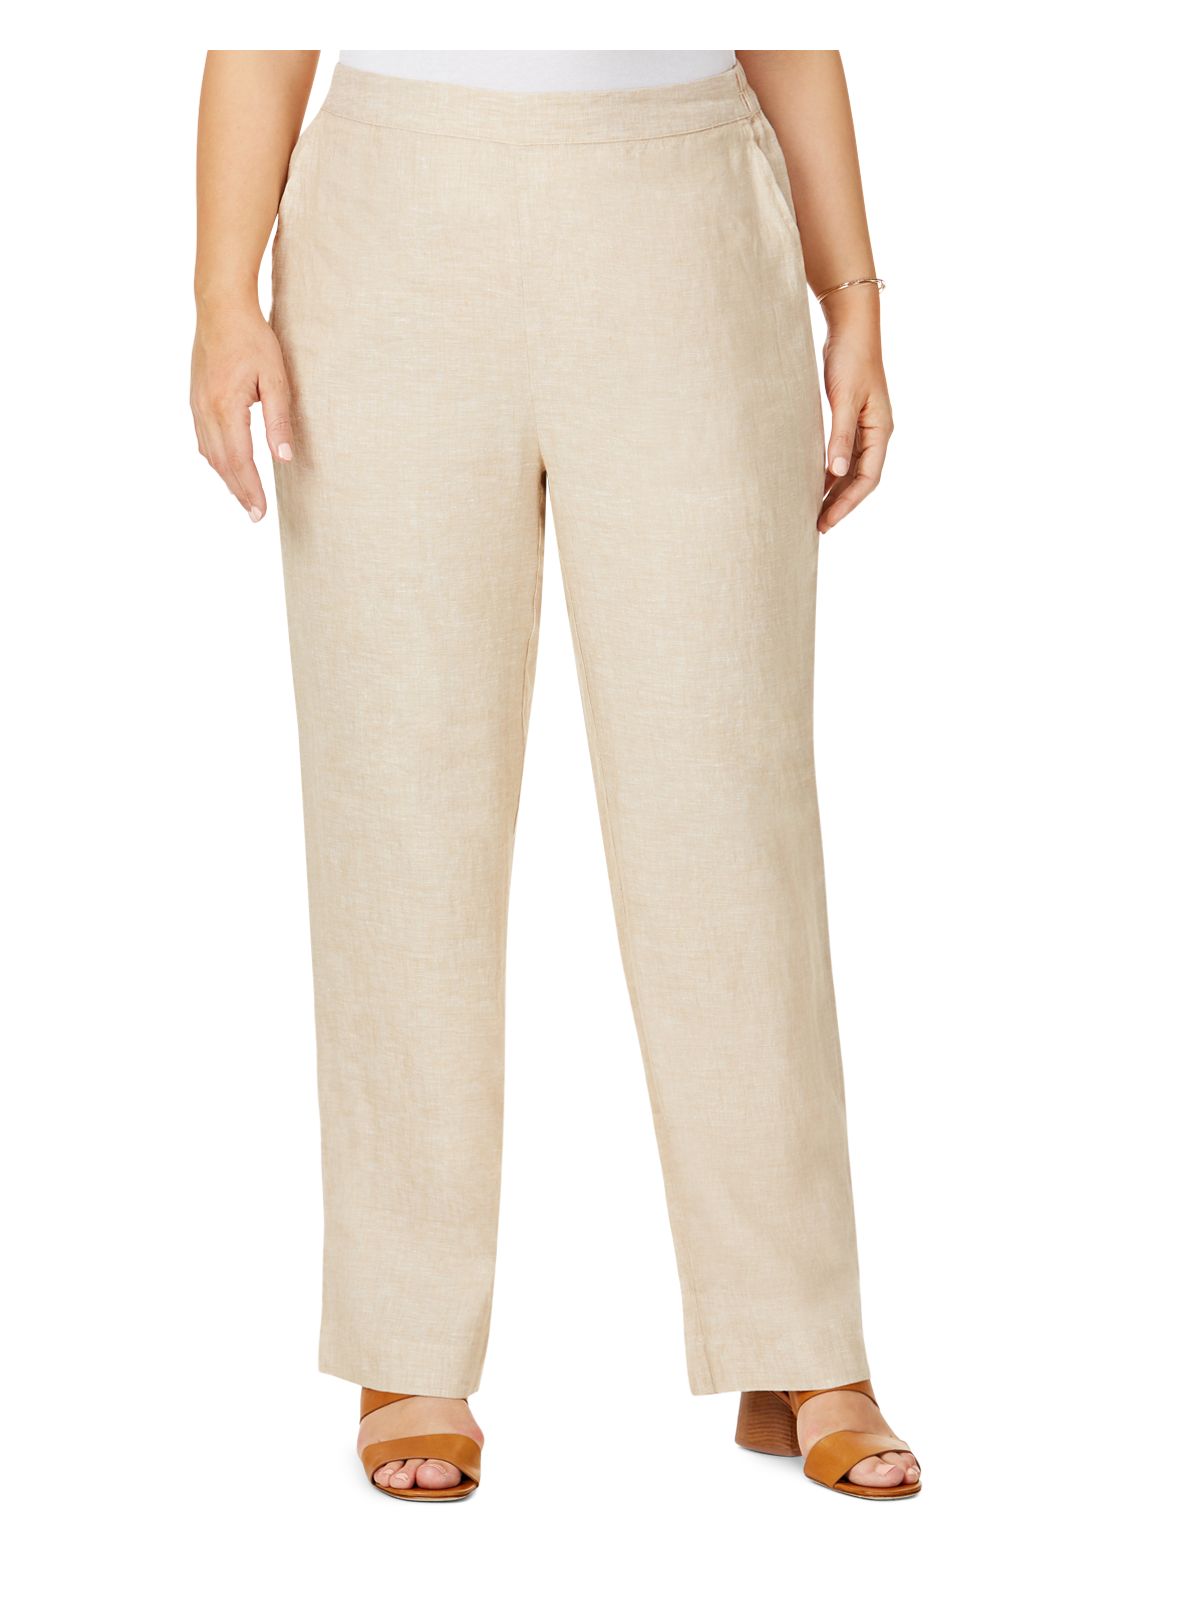 FOXCROFT Womens Beige Flat Front Pocketed Pull-on Style Elastic Back Waist Straight leg Pants 14